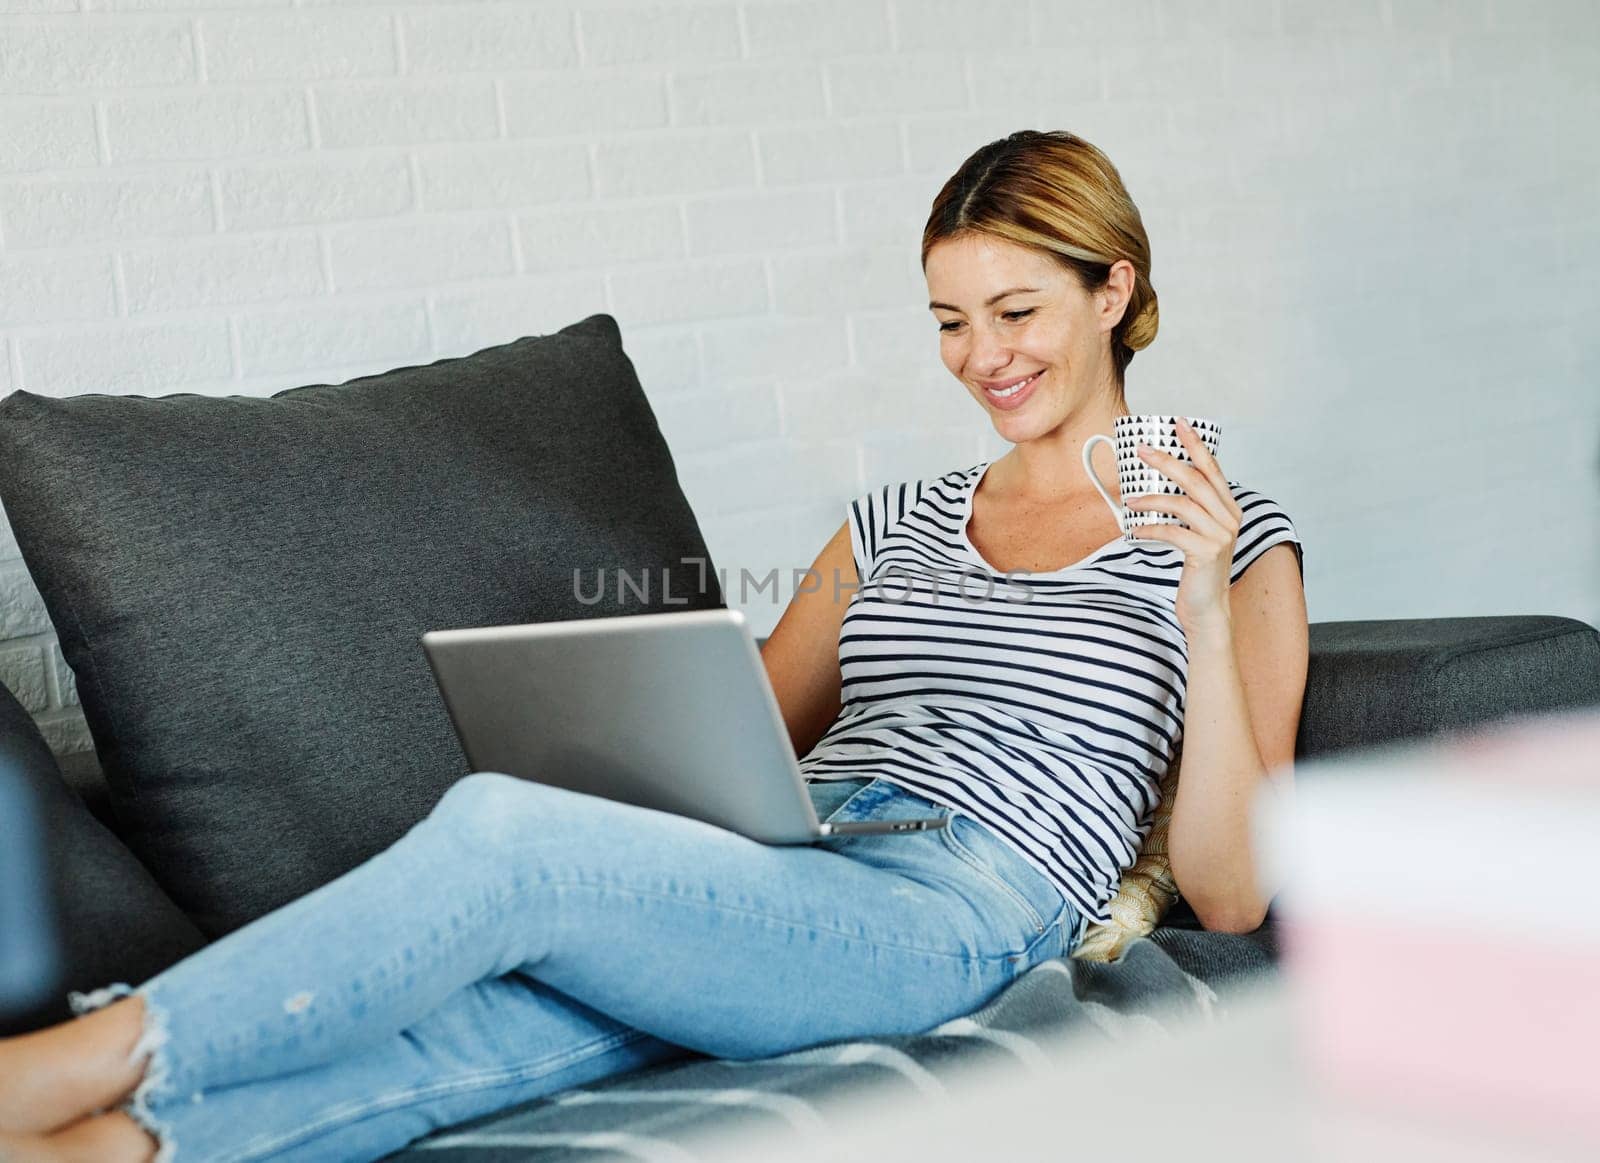 woman laptop sofa computer home technology young internet communication girl sitting by Picsfive